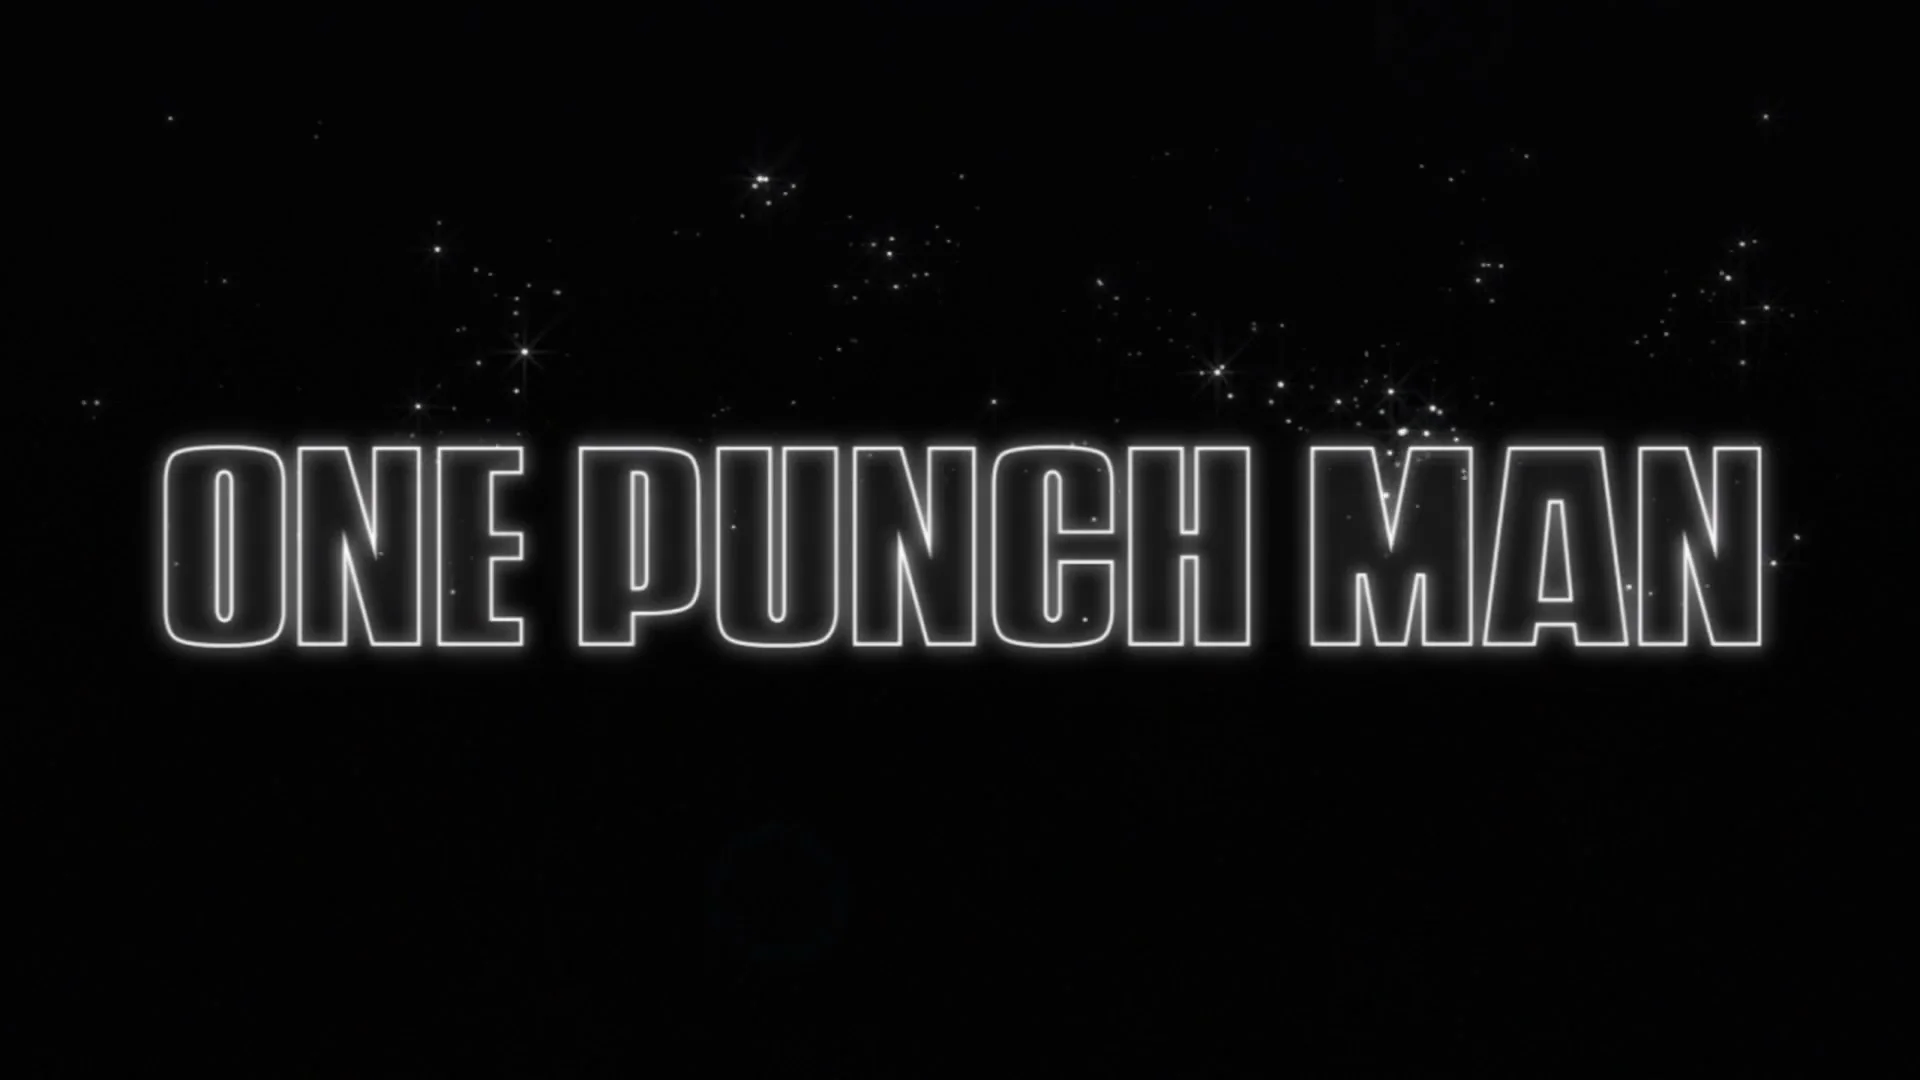 One punch man opening. Onepunchman надпись. One Punch man логотип. Punch надпись. Надпись оне Панч мен.